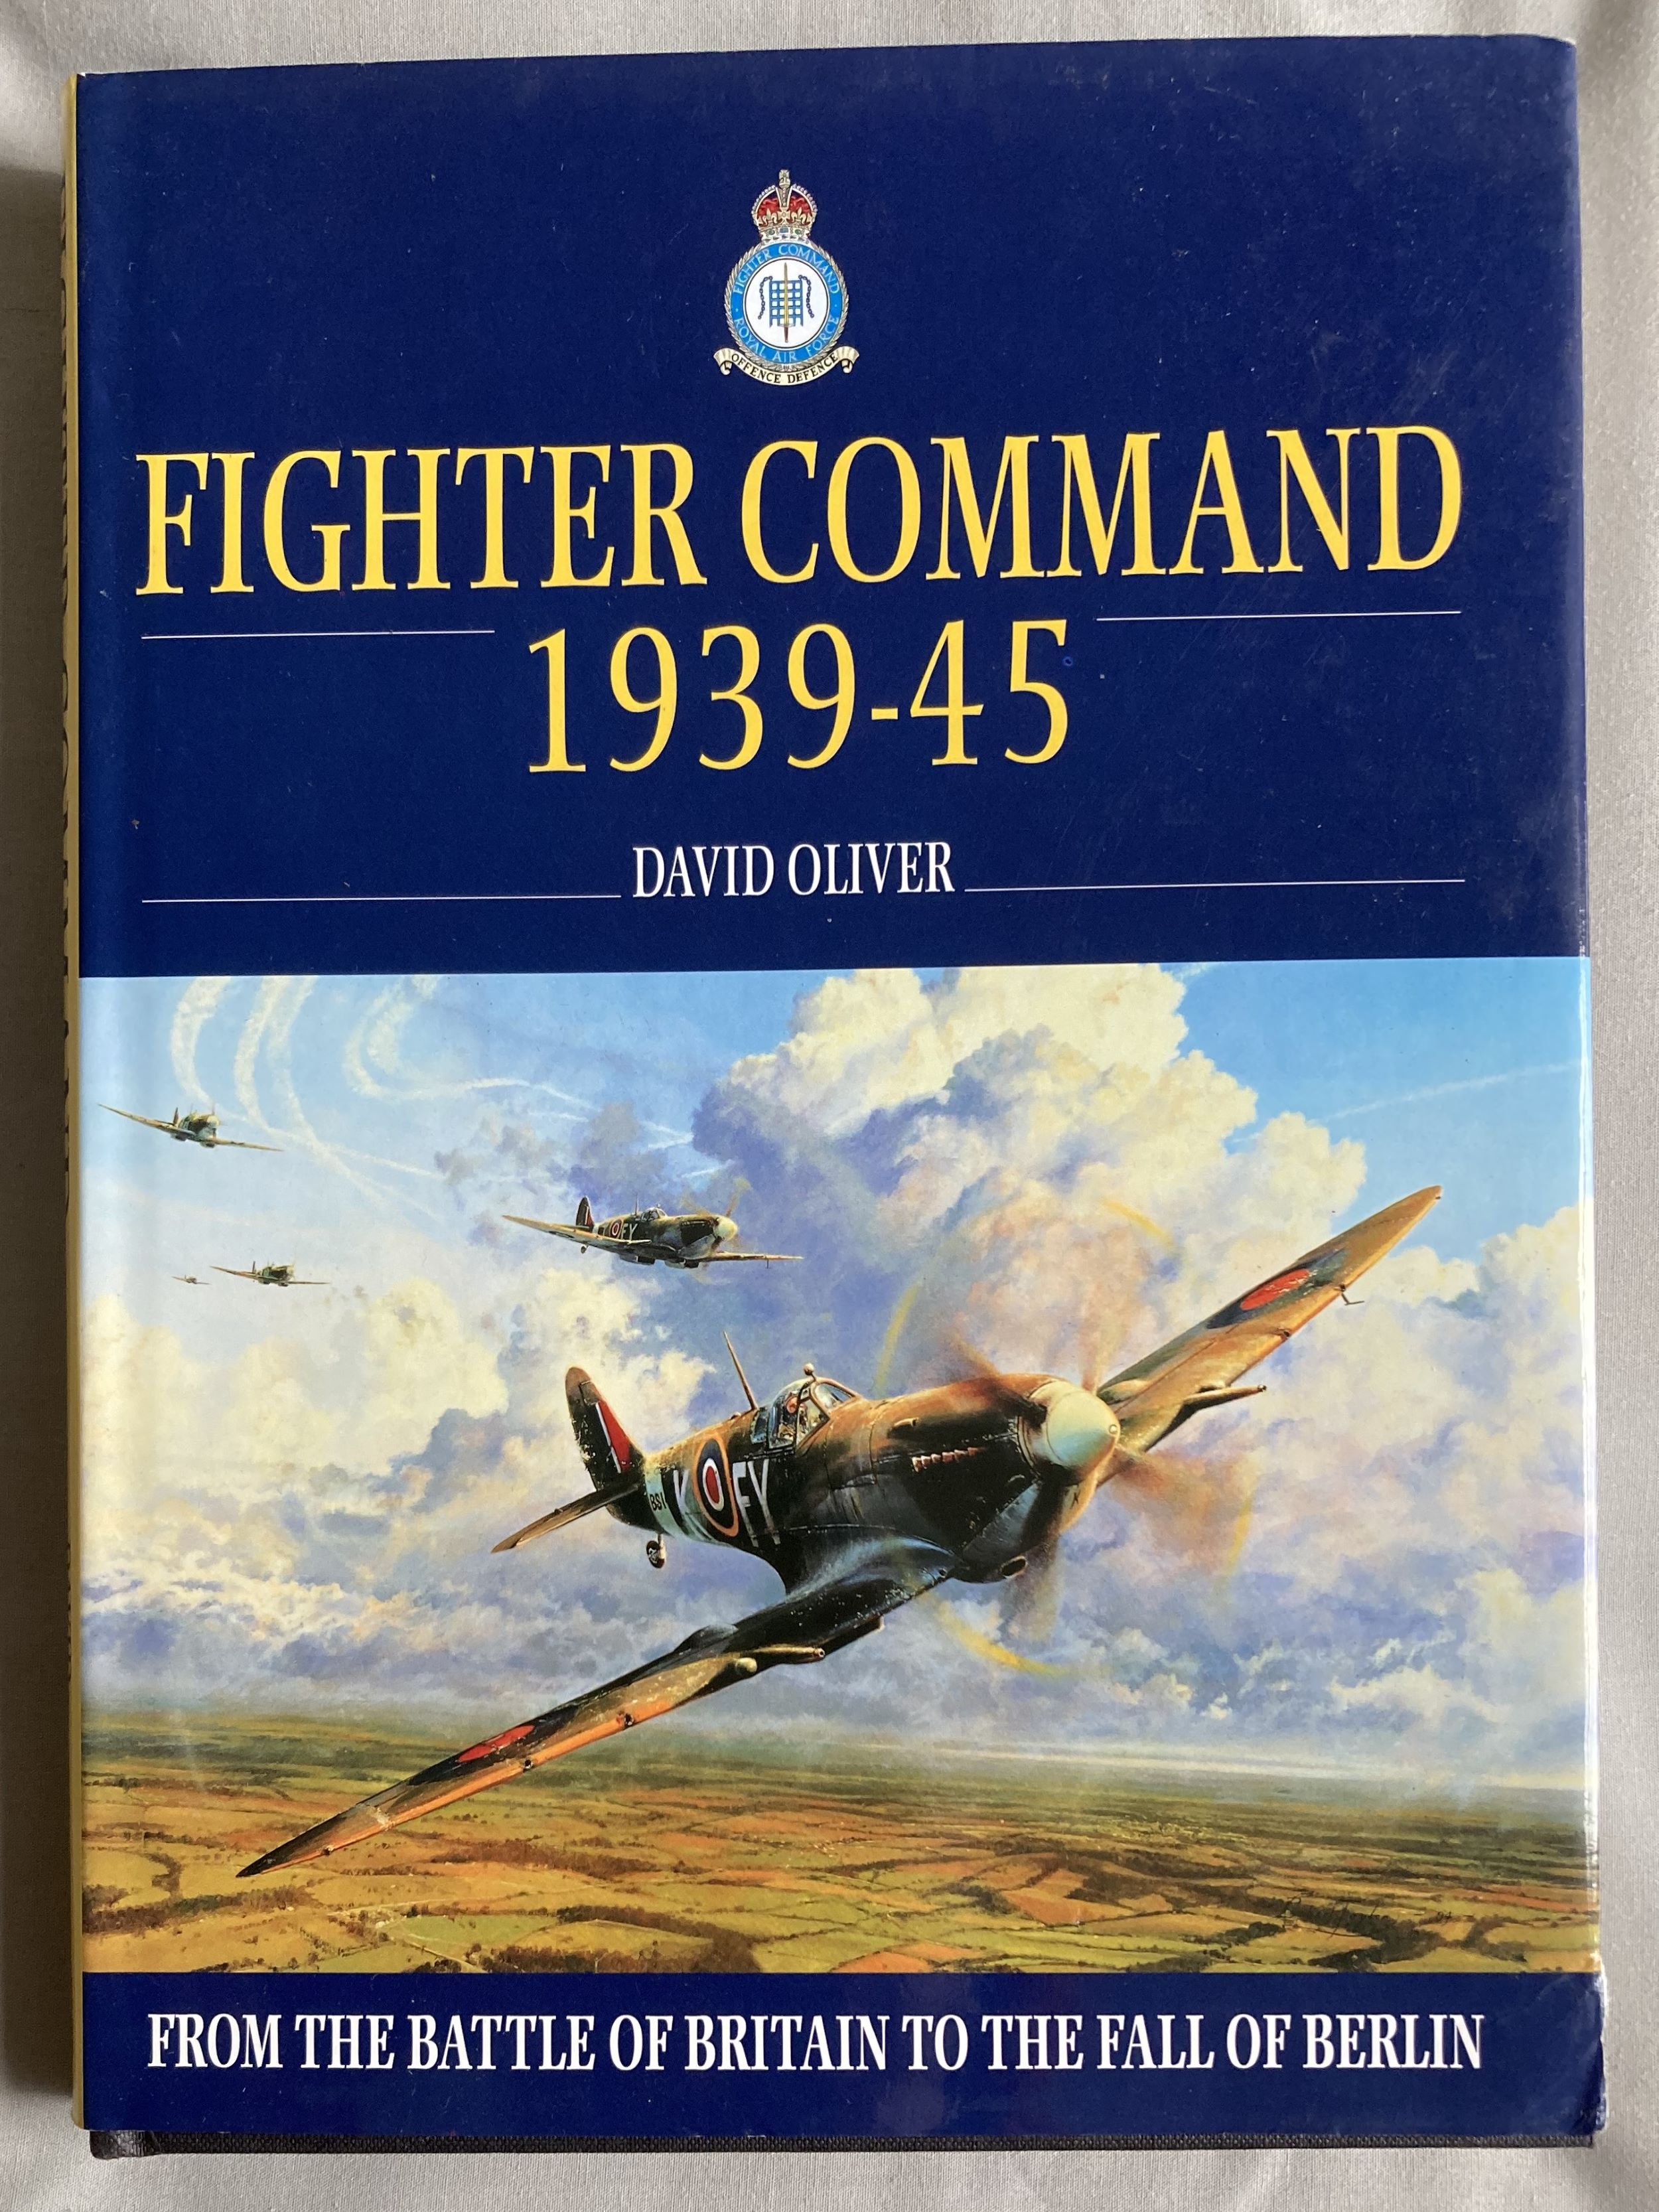 WW2 Fighter Command 1939 - 45 multiple signed hard back boon by David Oliver. Has 10 x 8 inch b/w